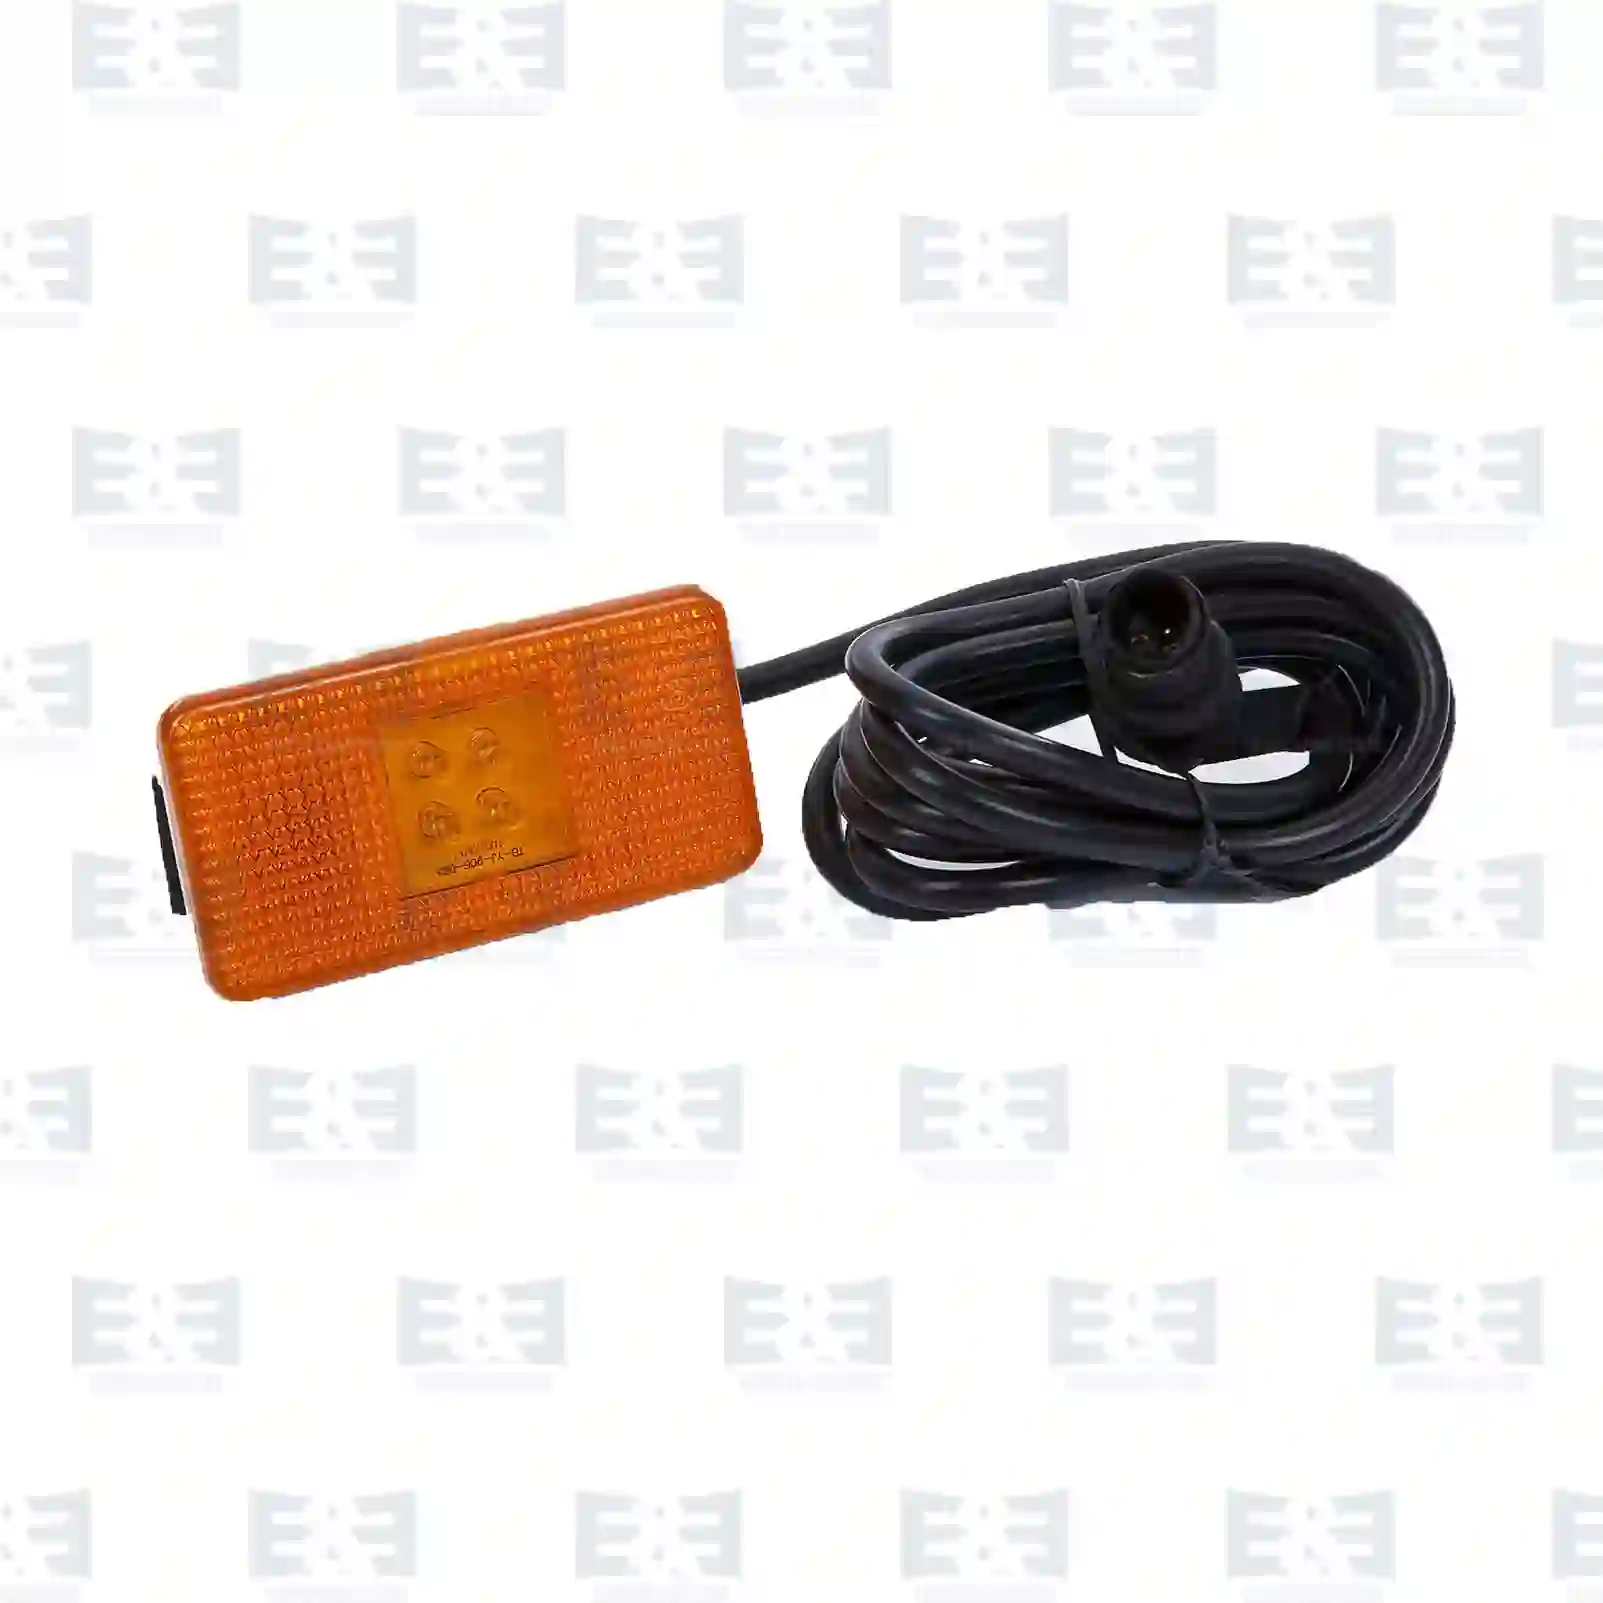 Marker Lamp Side marking lamp, EE No 2E2290187 ,  oem no:867475, 1365973, 1365975, 1379371, 1391144, 1443884, 1471599, ZG20847-0008 E&E Truck Spare Parts | Truck Spare Parts, Auotomotive Spare Parts